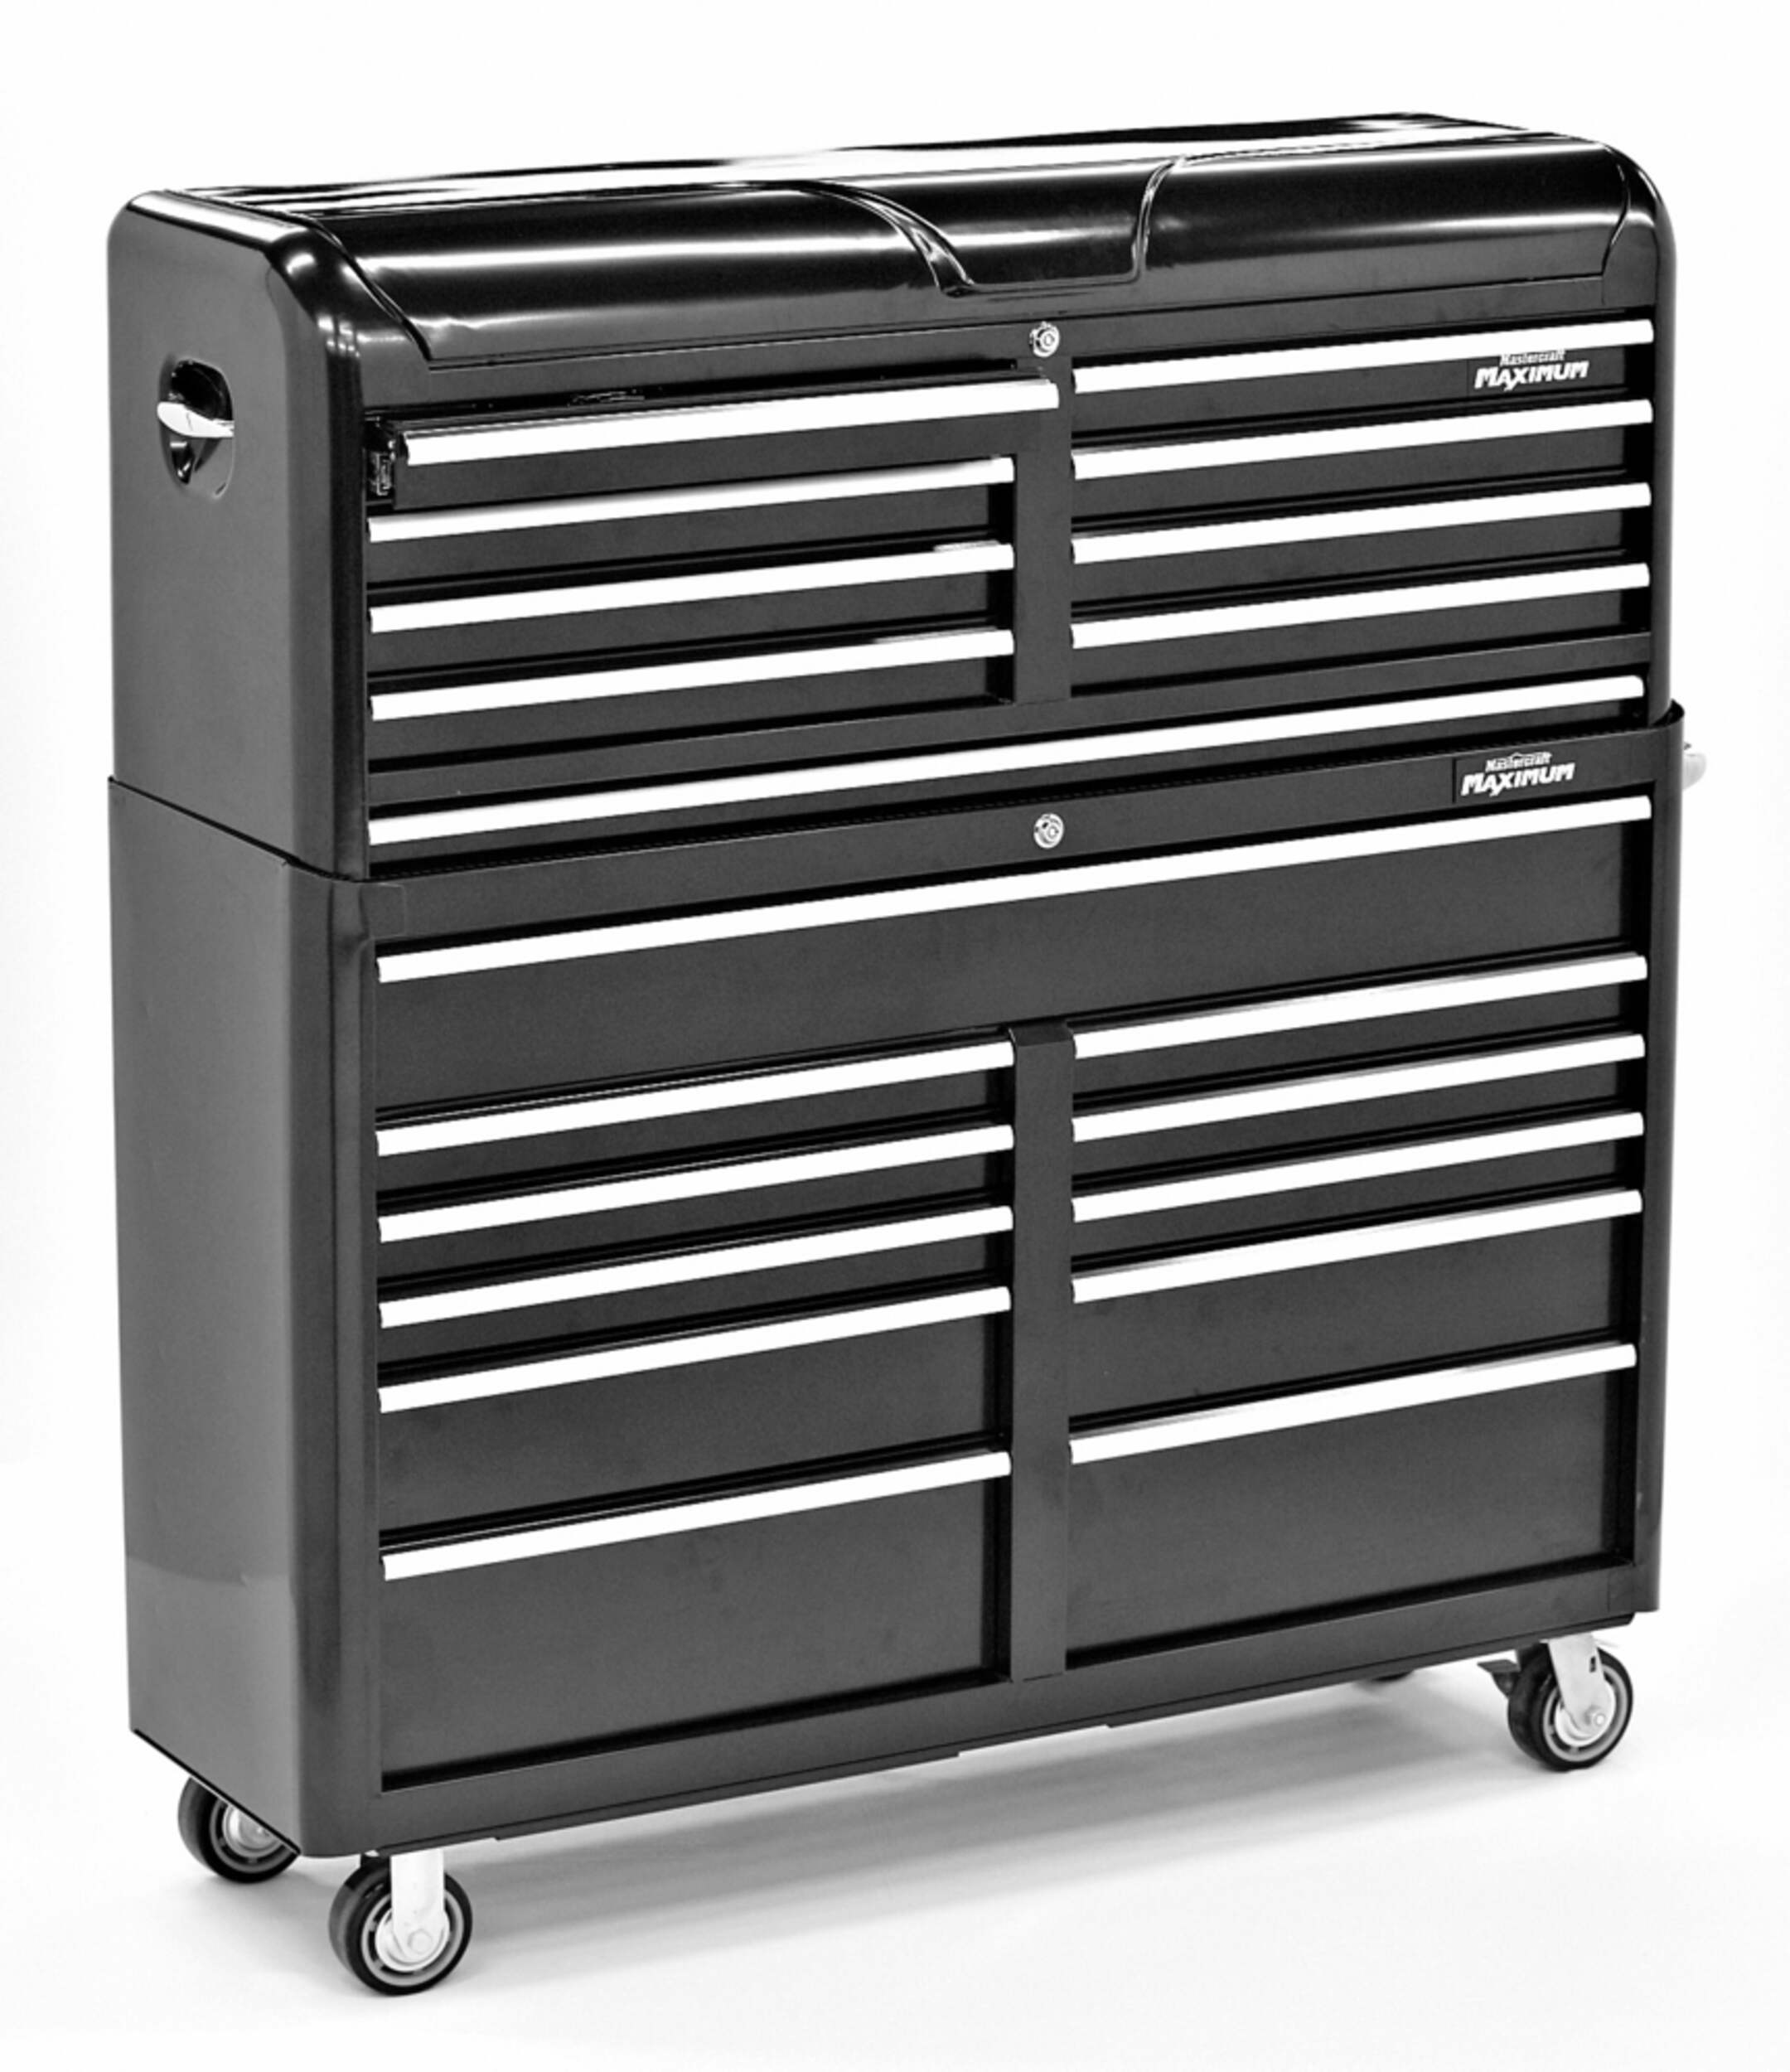 Mastercraft Maximum 56 Tool Cabinet With Wood Top Aa34b169 80b2 442d 8e6d 1c1039ff4ad2 ?imdensity=1&imwidth=640&impolicy=gZoom